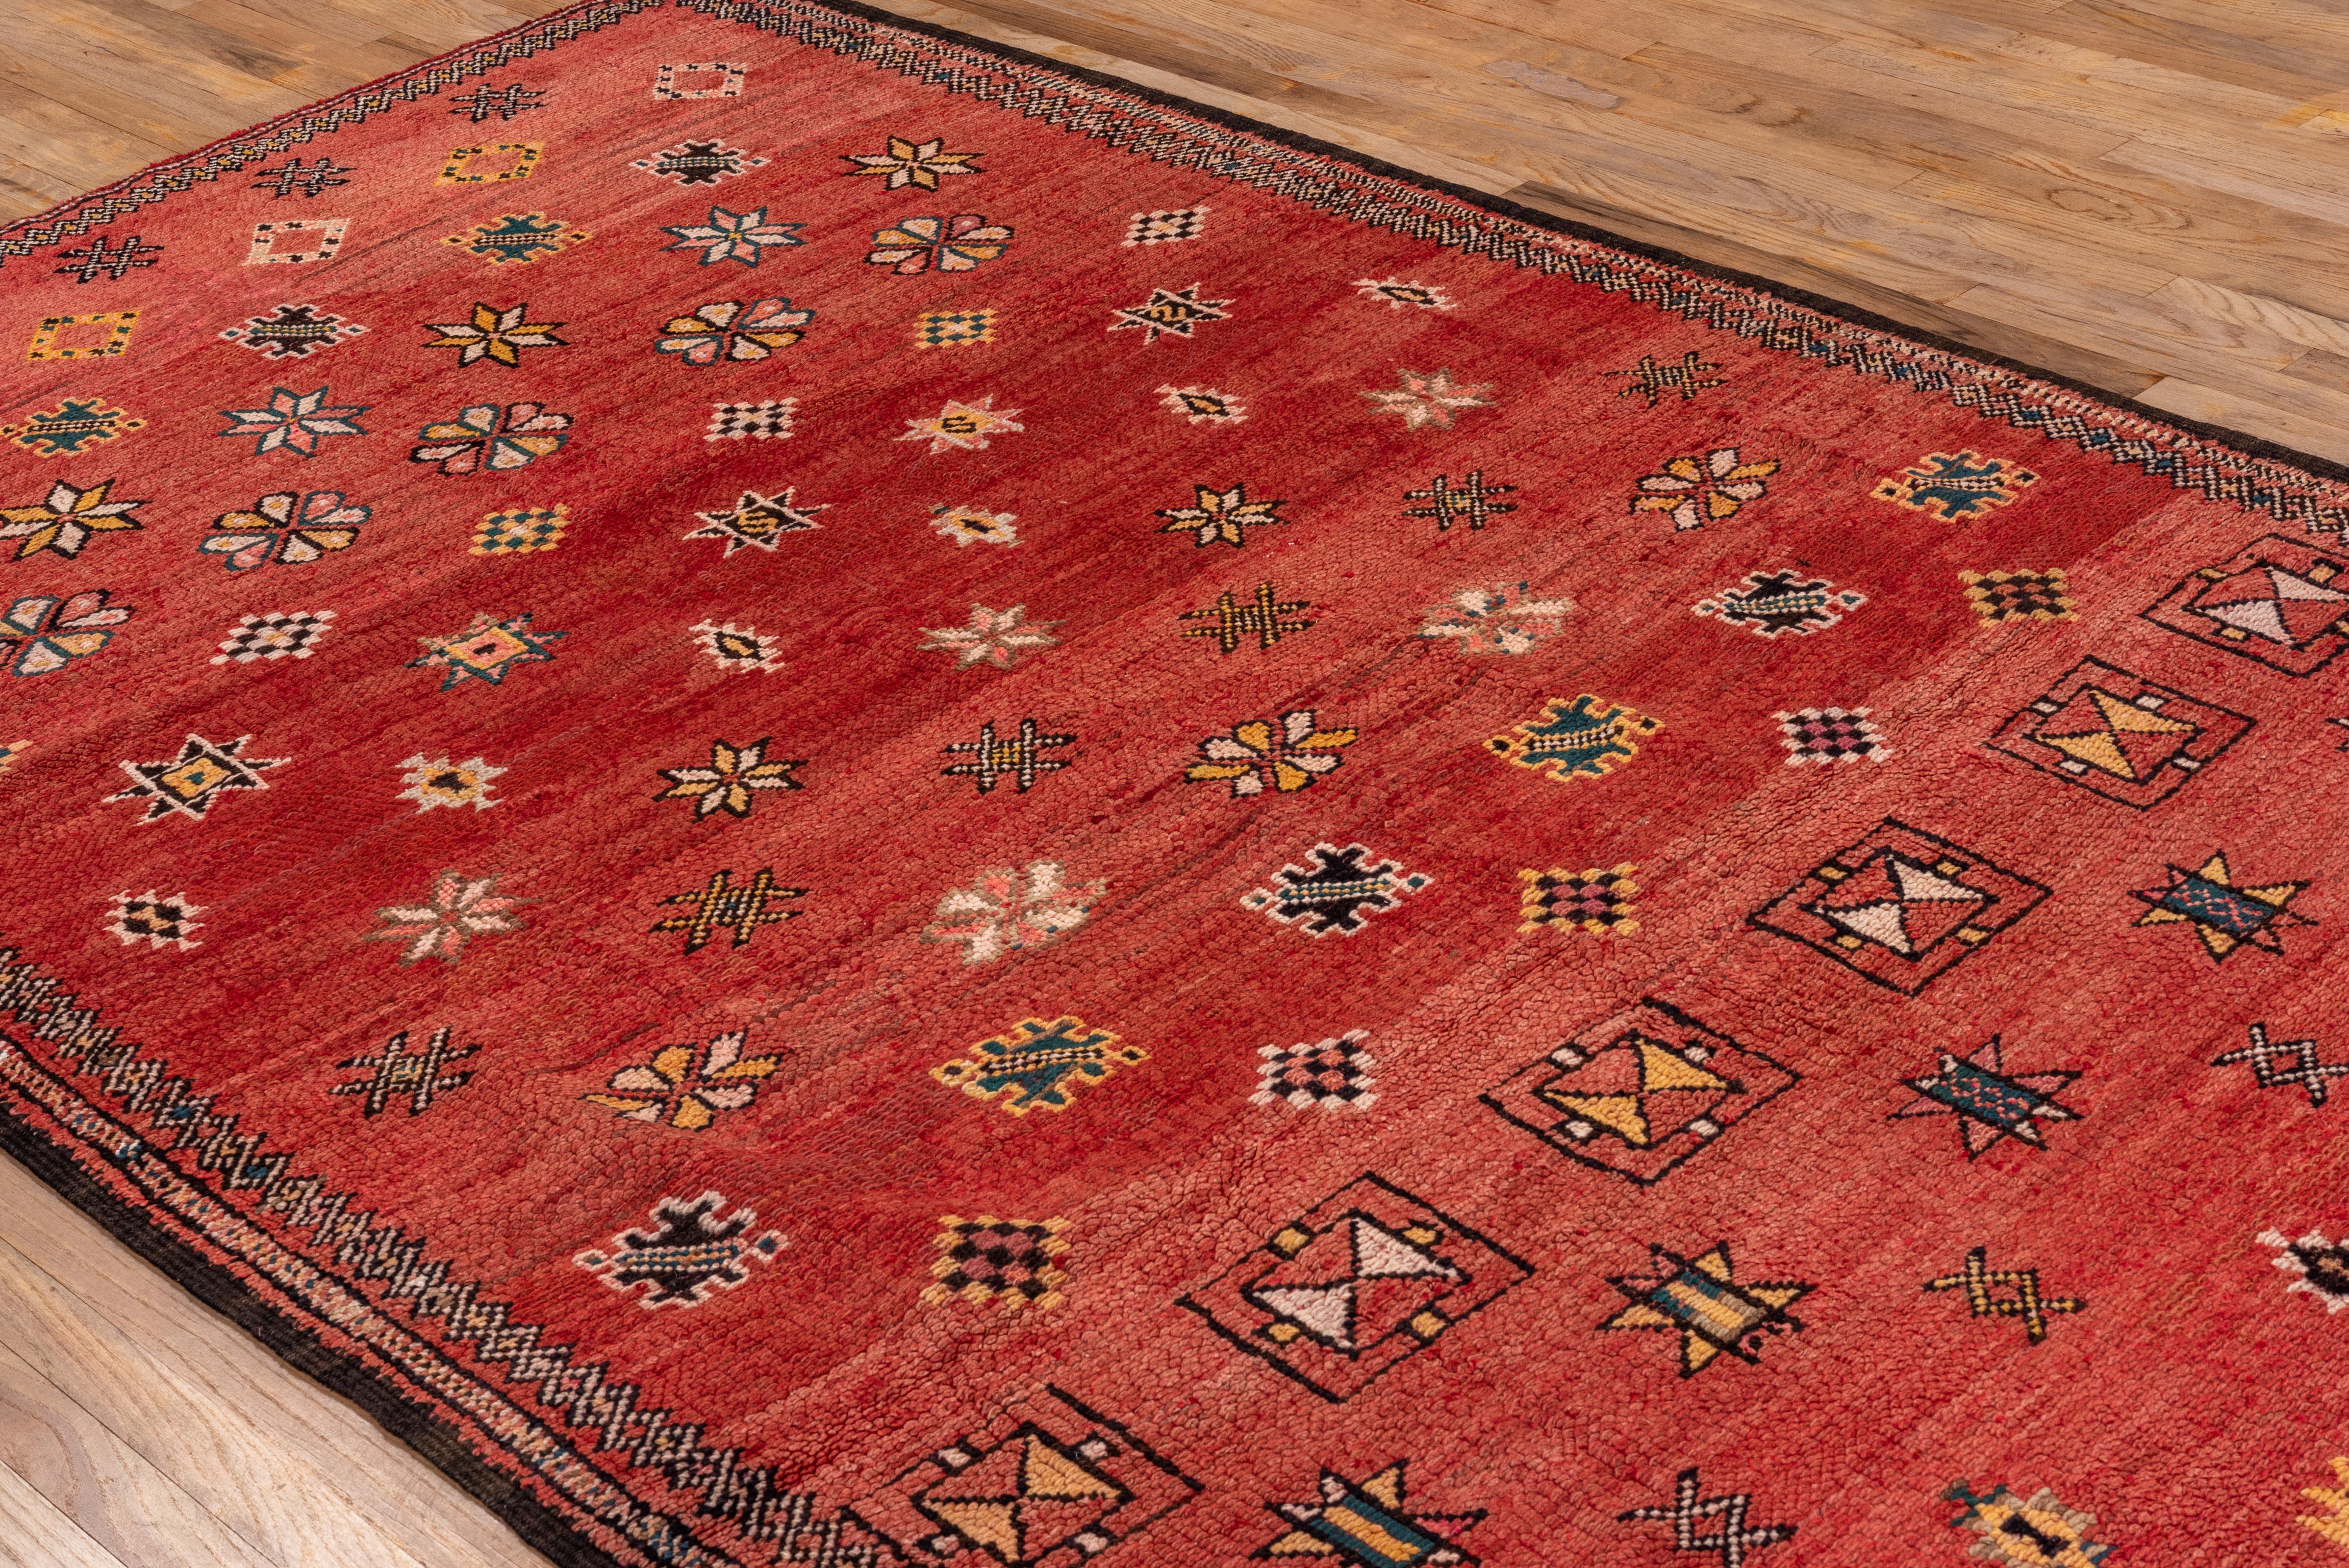 The soft red pallet of this rug is warm and inviting for any space, with delicately woven floral, star shaped accents across the field of the carpet - this is a beautiful vintage design from the mid twentieth century. 